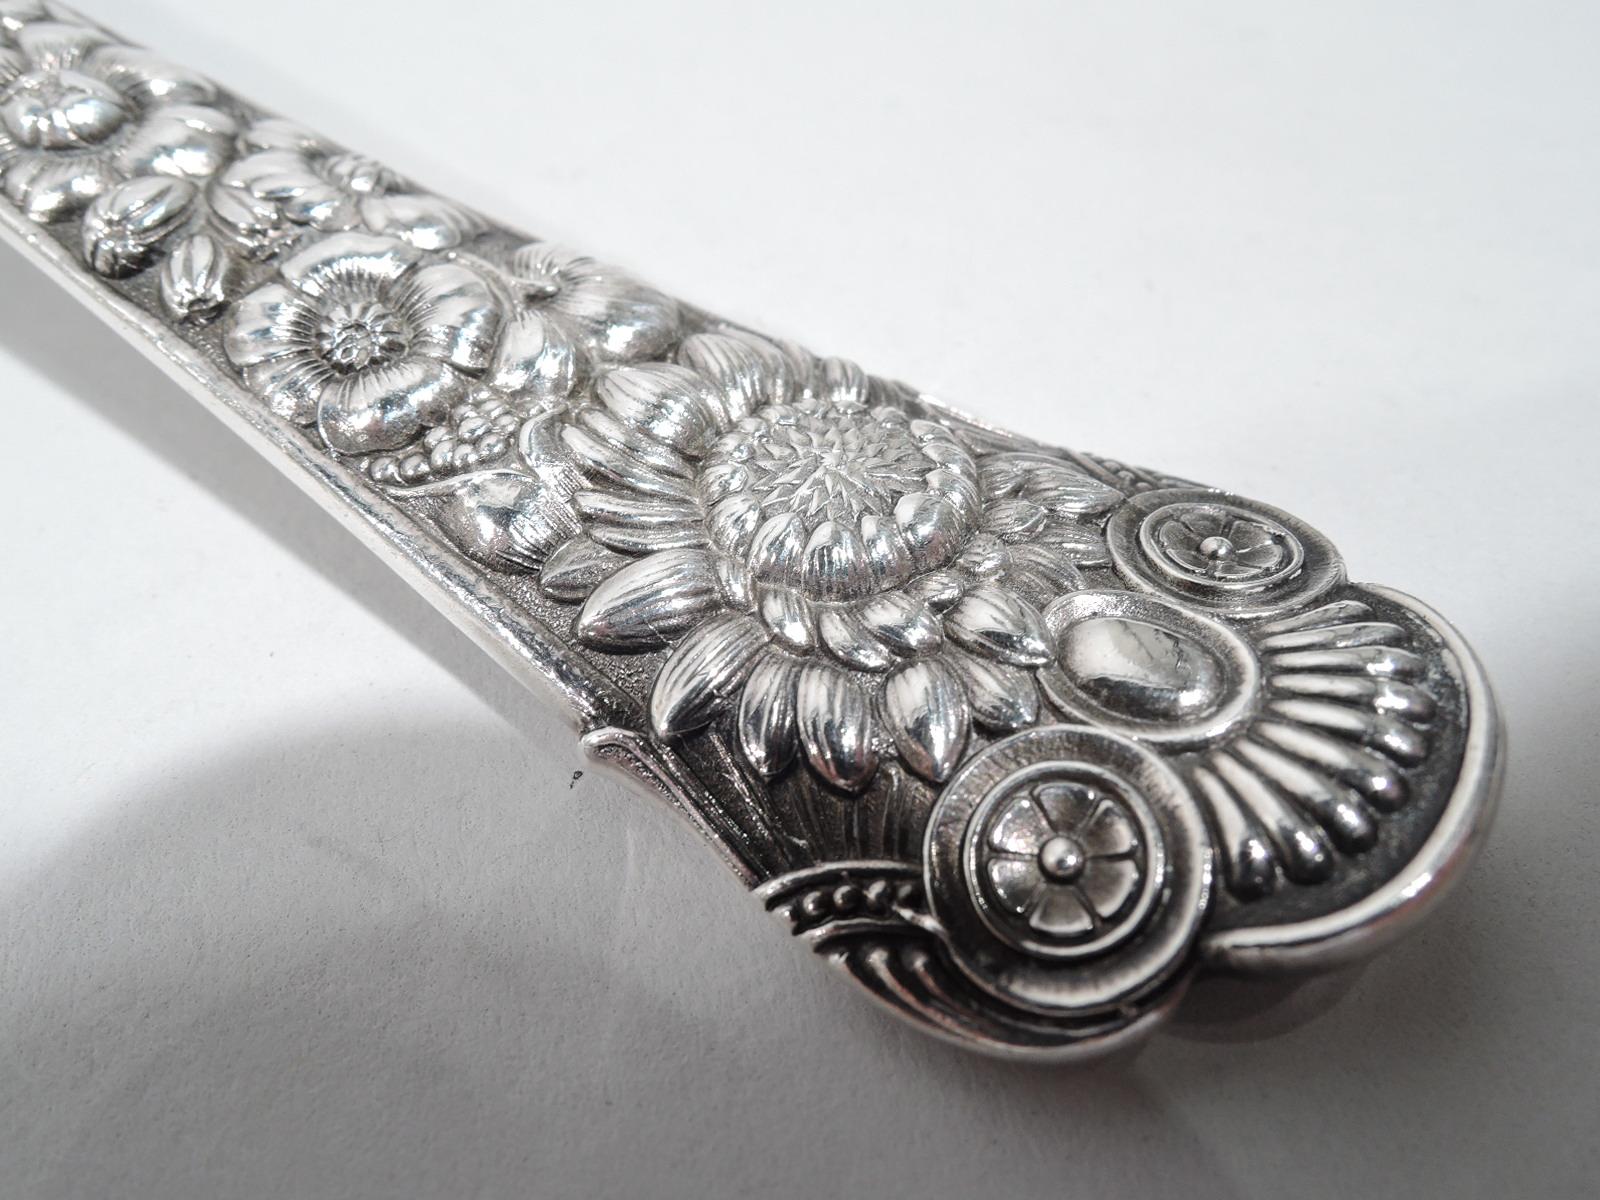 American Antique Gorham Cluny Sterling Silver Fish Server